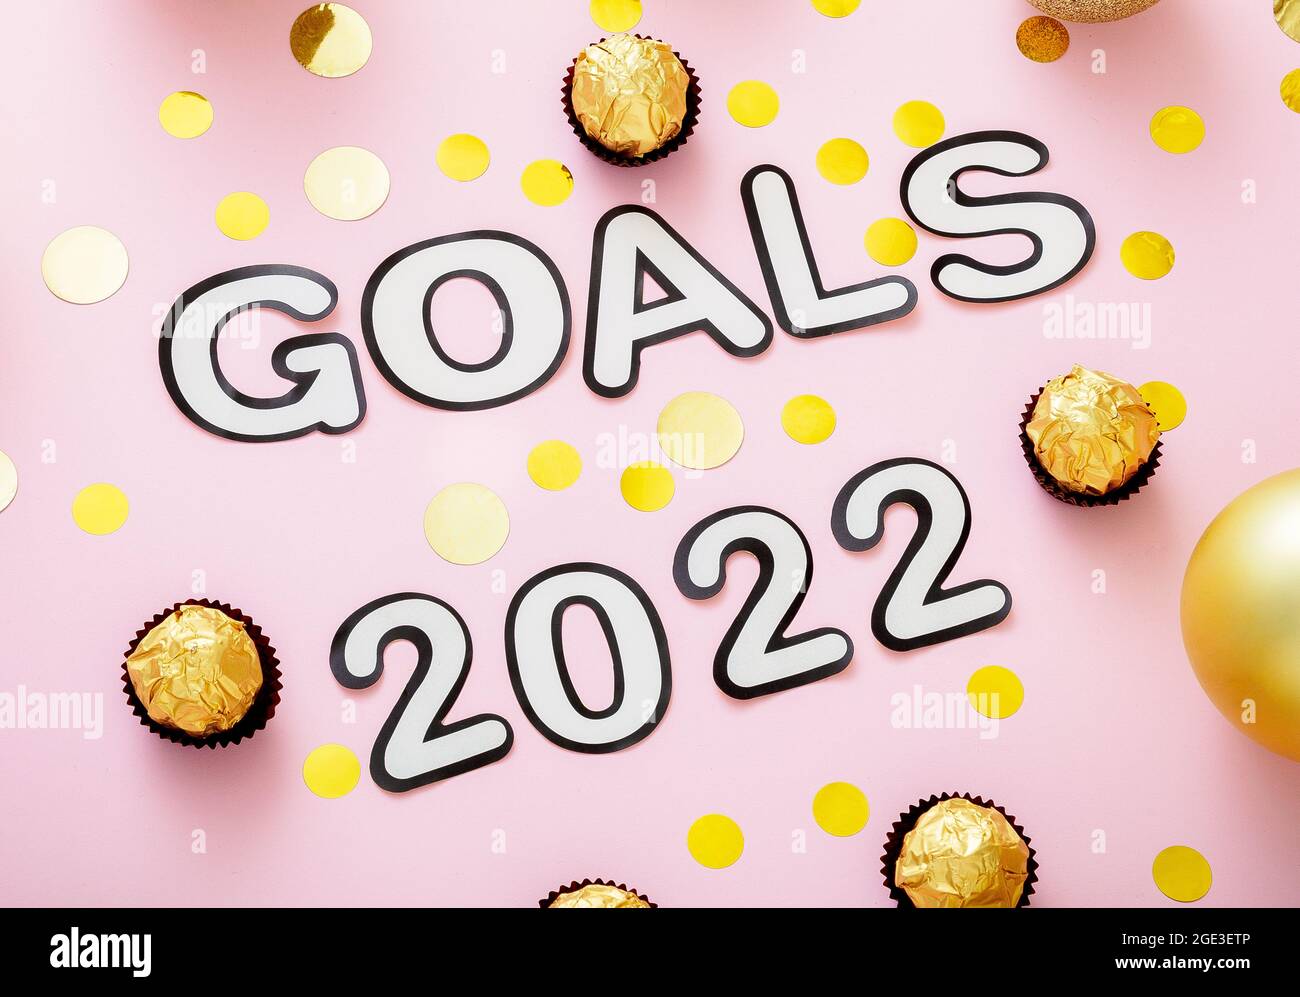 Goals 2022 lettering in Happy New Year style. 2020 Goals text with Christmas decorations gold confetti on pink color background. Stock Photo